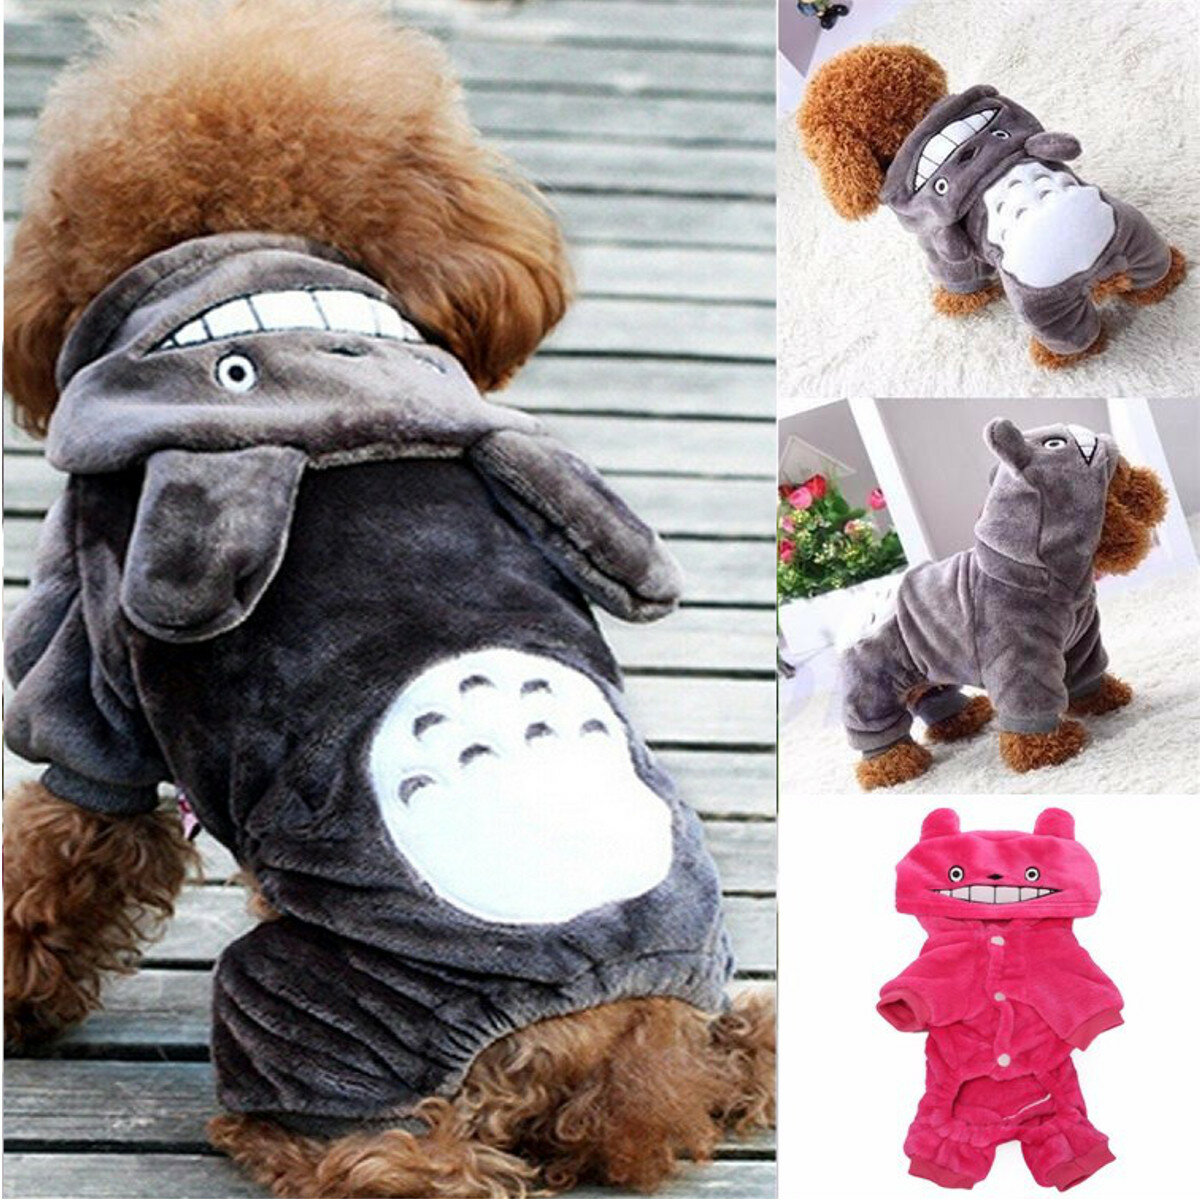 Dog Clothes Durable Soft for Puppy Supplies Washable Costume Overalls Clothing Coat Jacket Pet Suit